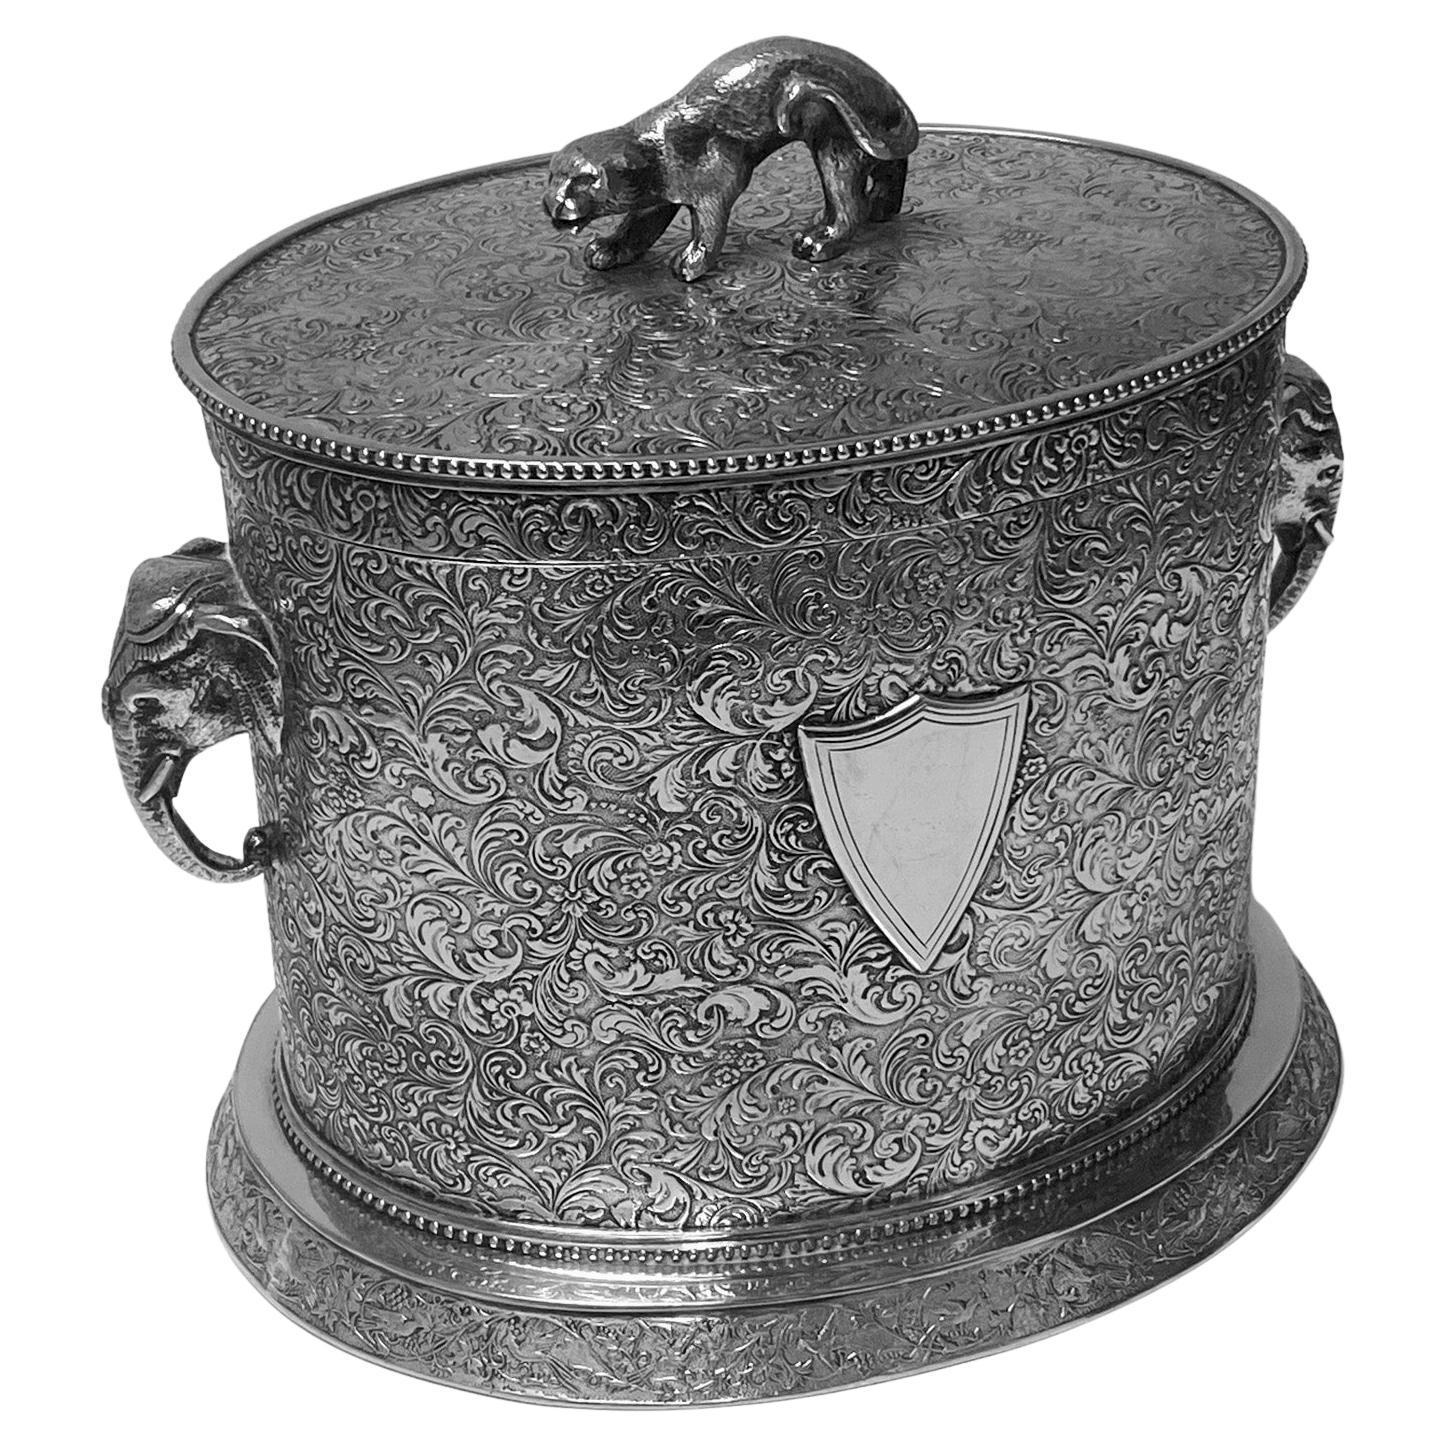 Antique Anglo-Indian style large biscuit box, silber & Fleming C. 1880. This very unusual style large biscuit barrel of ovoid shape on oval base richly decorated and engraved depicting birds amongst flowering branches against stippled background and